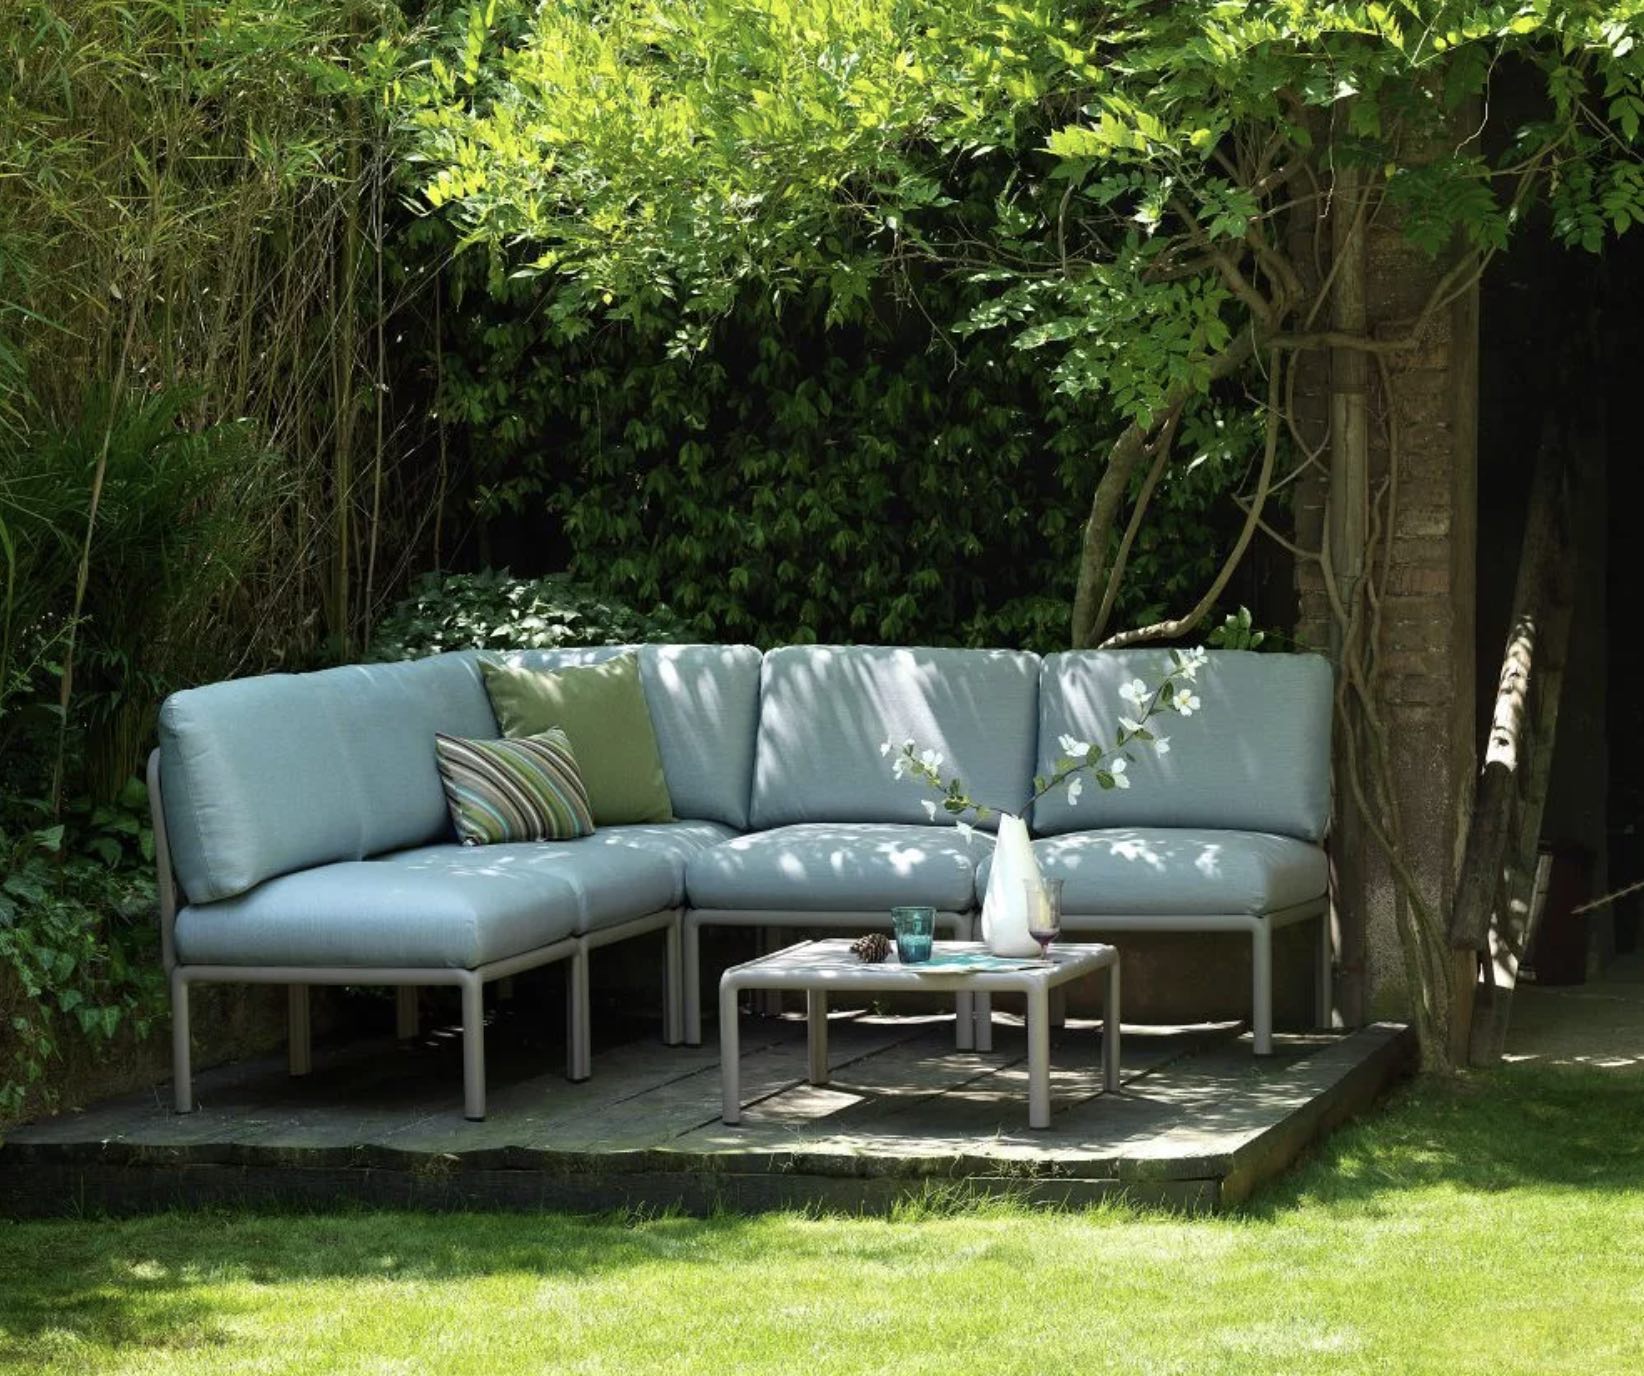 Creating a Cosy Outdoor Retreat with Nardi Garden Furniture